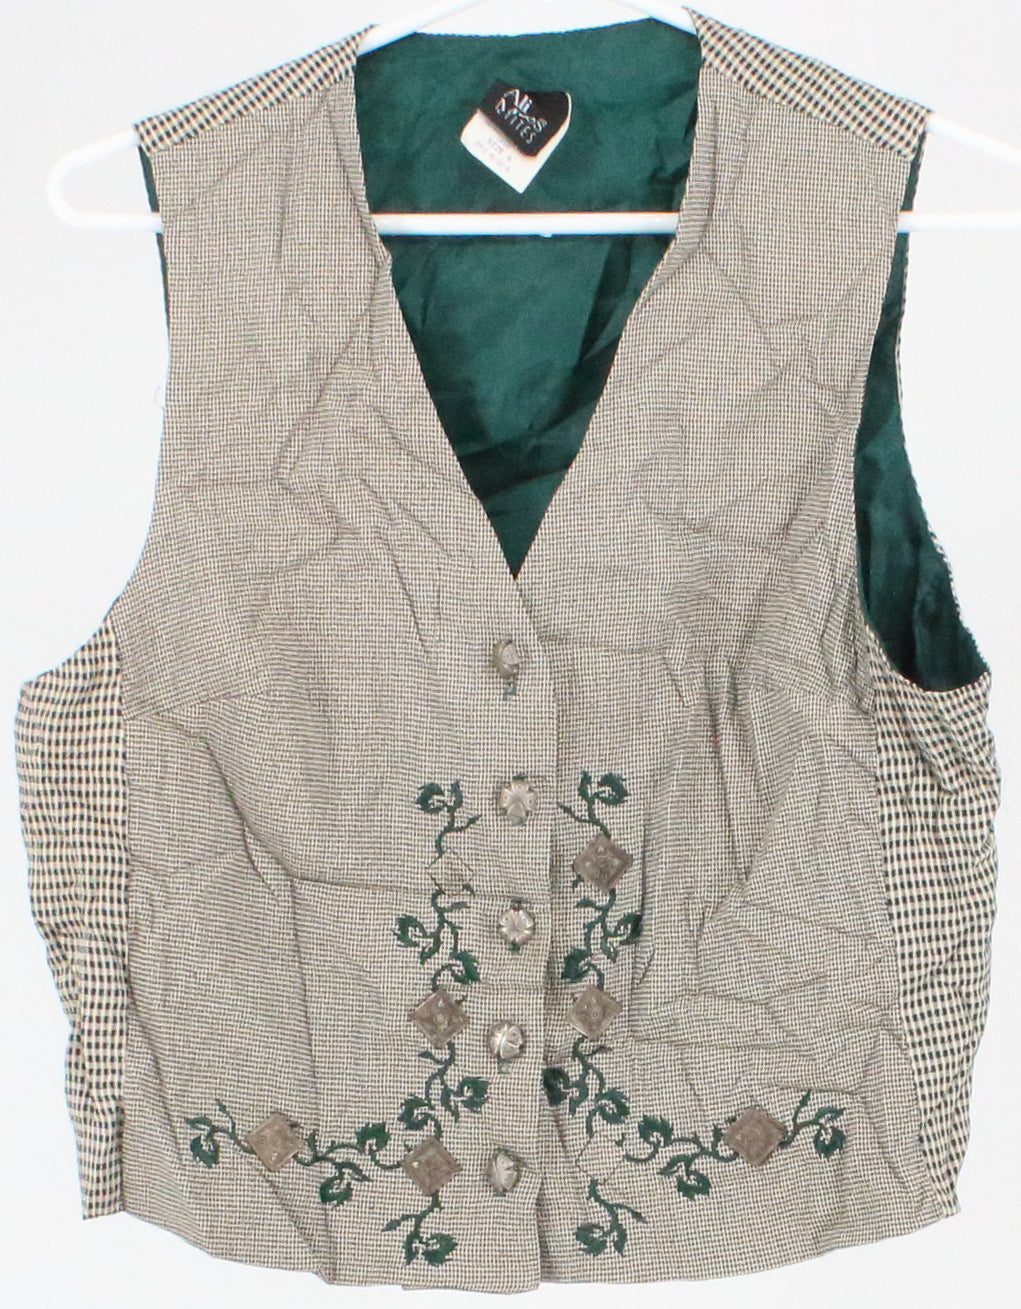 Ali Miles Green and Beige Plaid Embroidered Vest